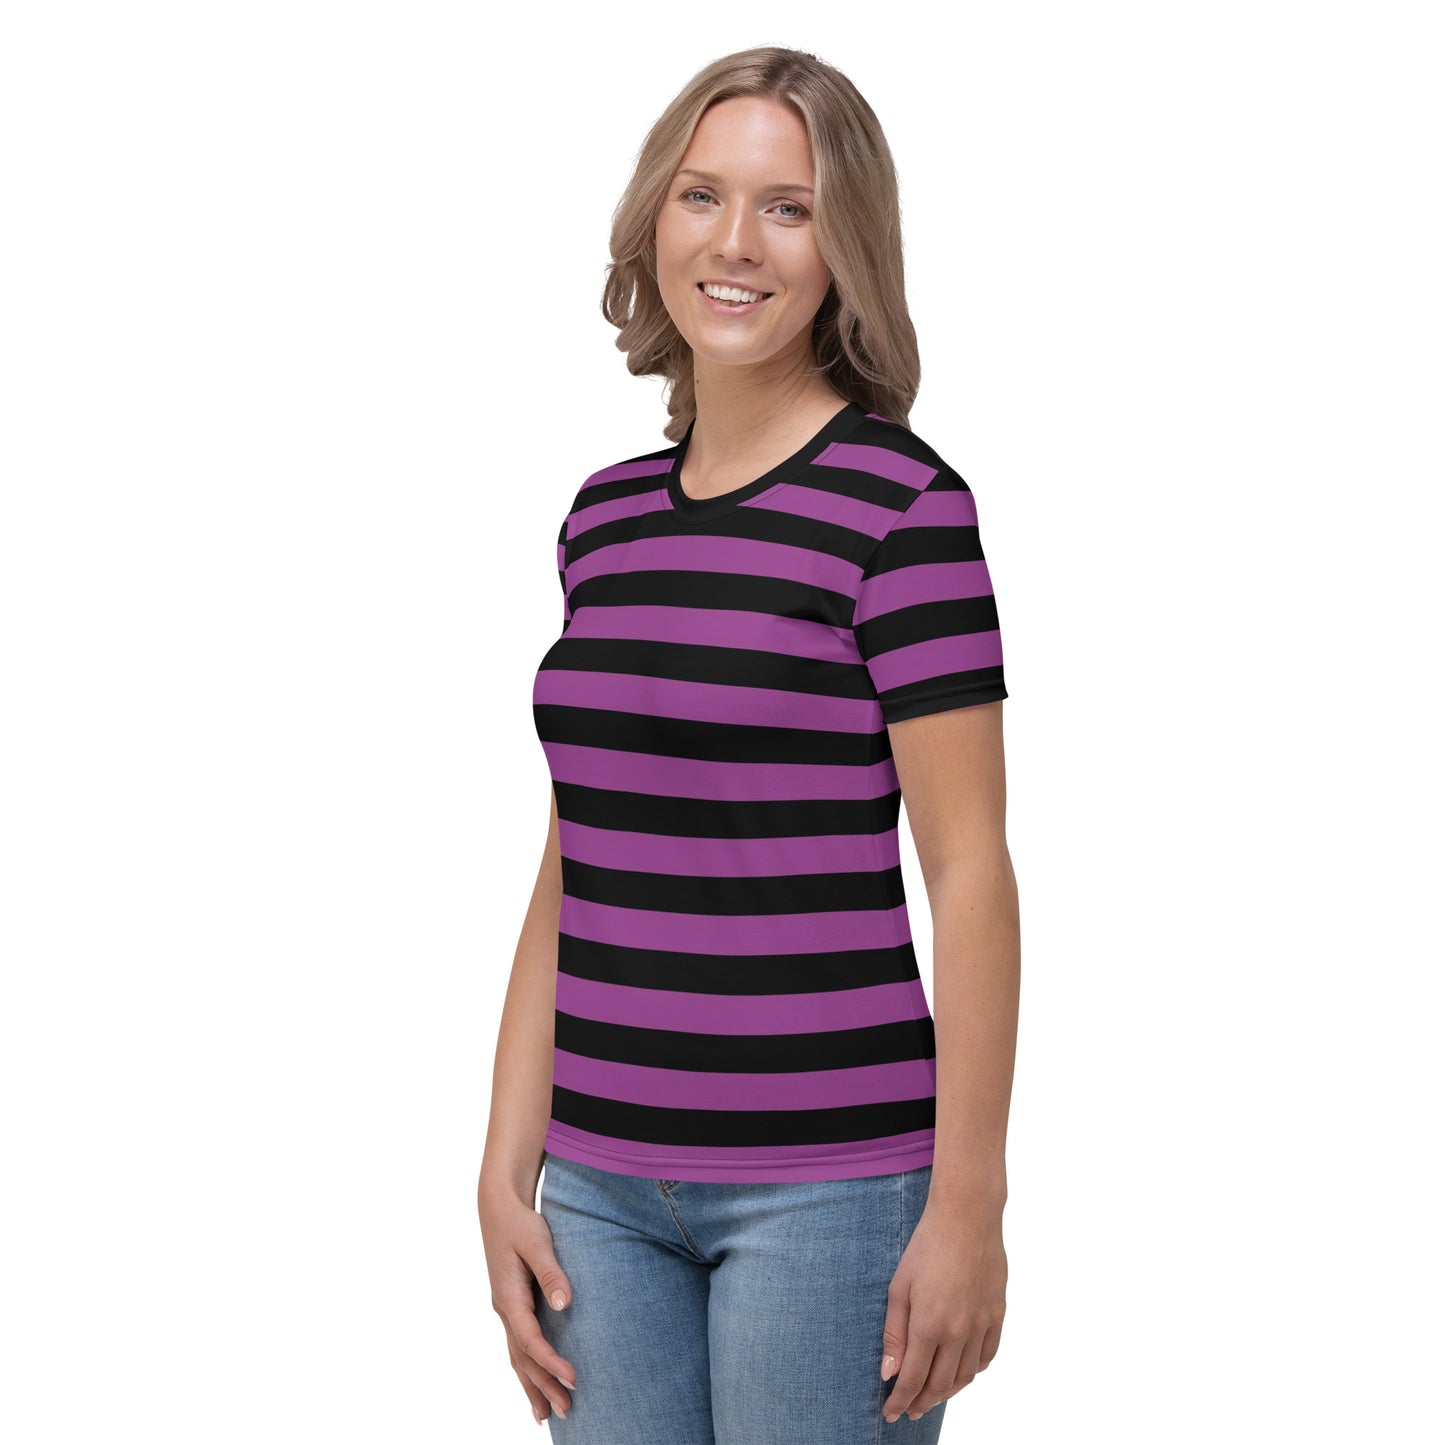 Black and Purple Striped Women Tshirt, Gothic Emo Ladies Female Designer Adult Aesthetic Fashion Fitted Crewneck Tee Shirt Top